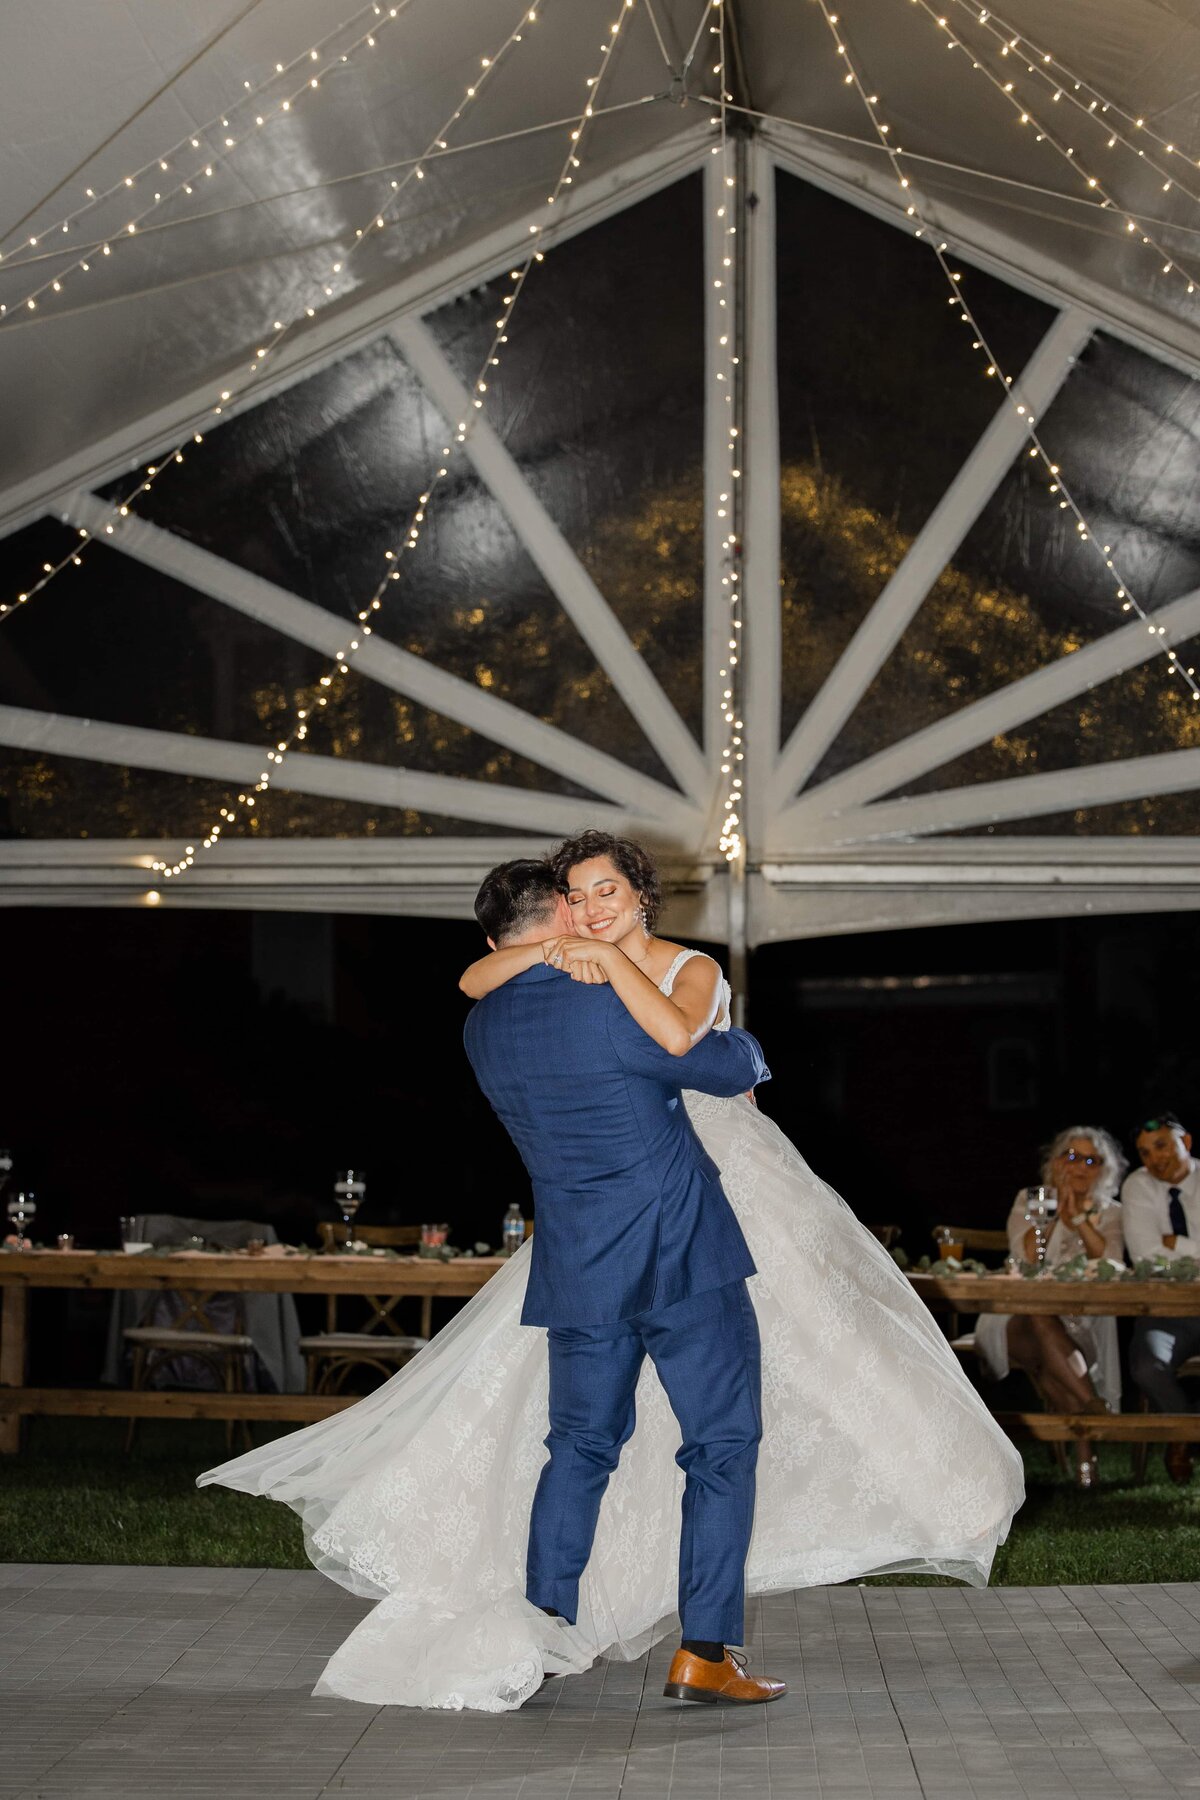 A bride and groom dance under a tent with string lights at a night-time wedding reception at a park farm winery, with guests seated around them.